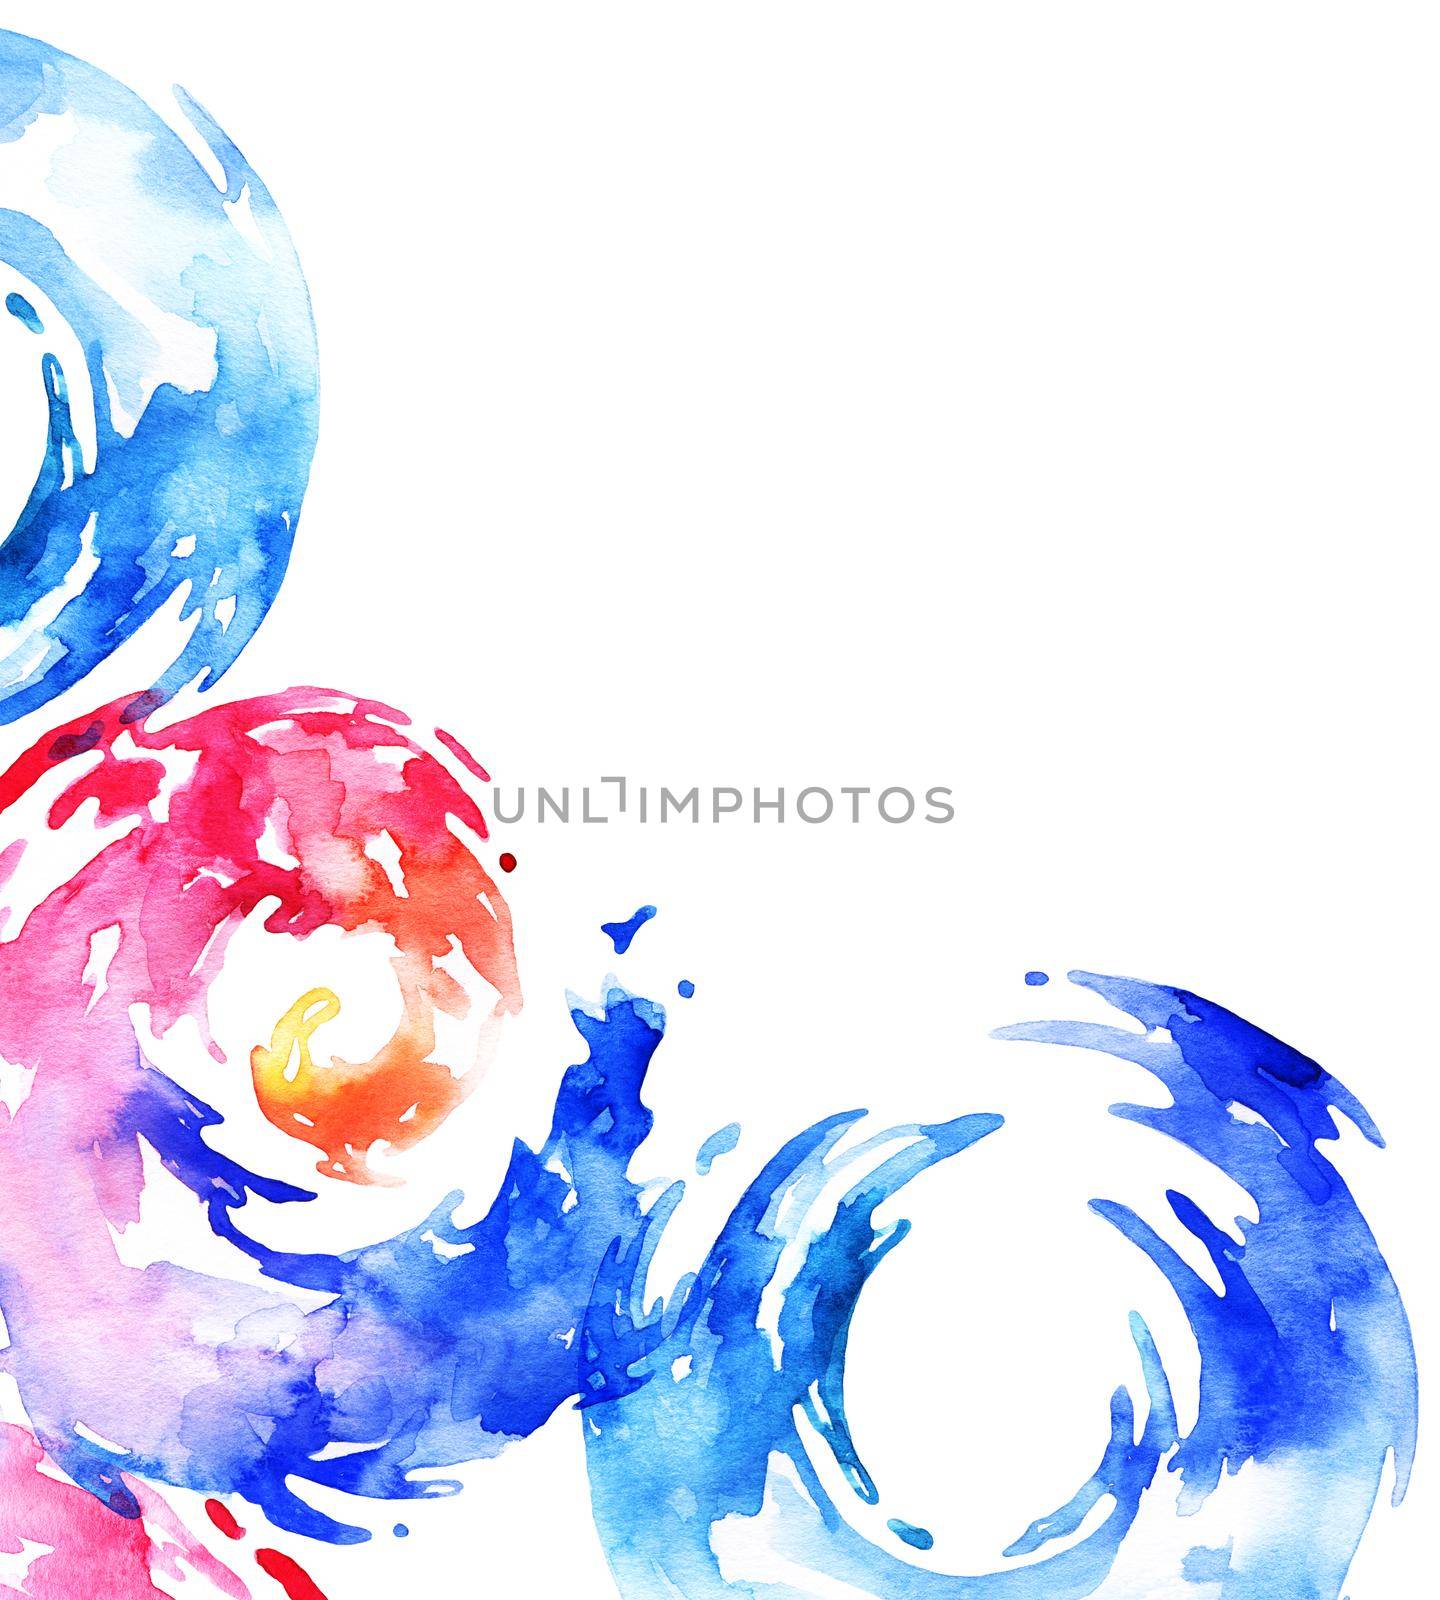 Abstract watercolor color stains - hand drawn decorative elements on white background